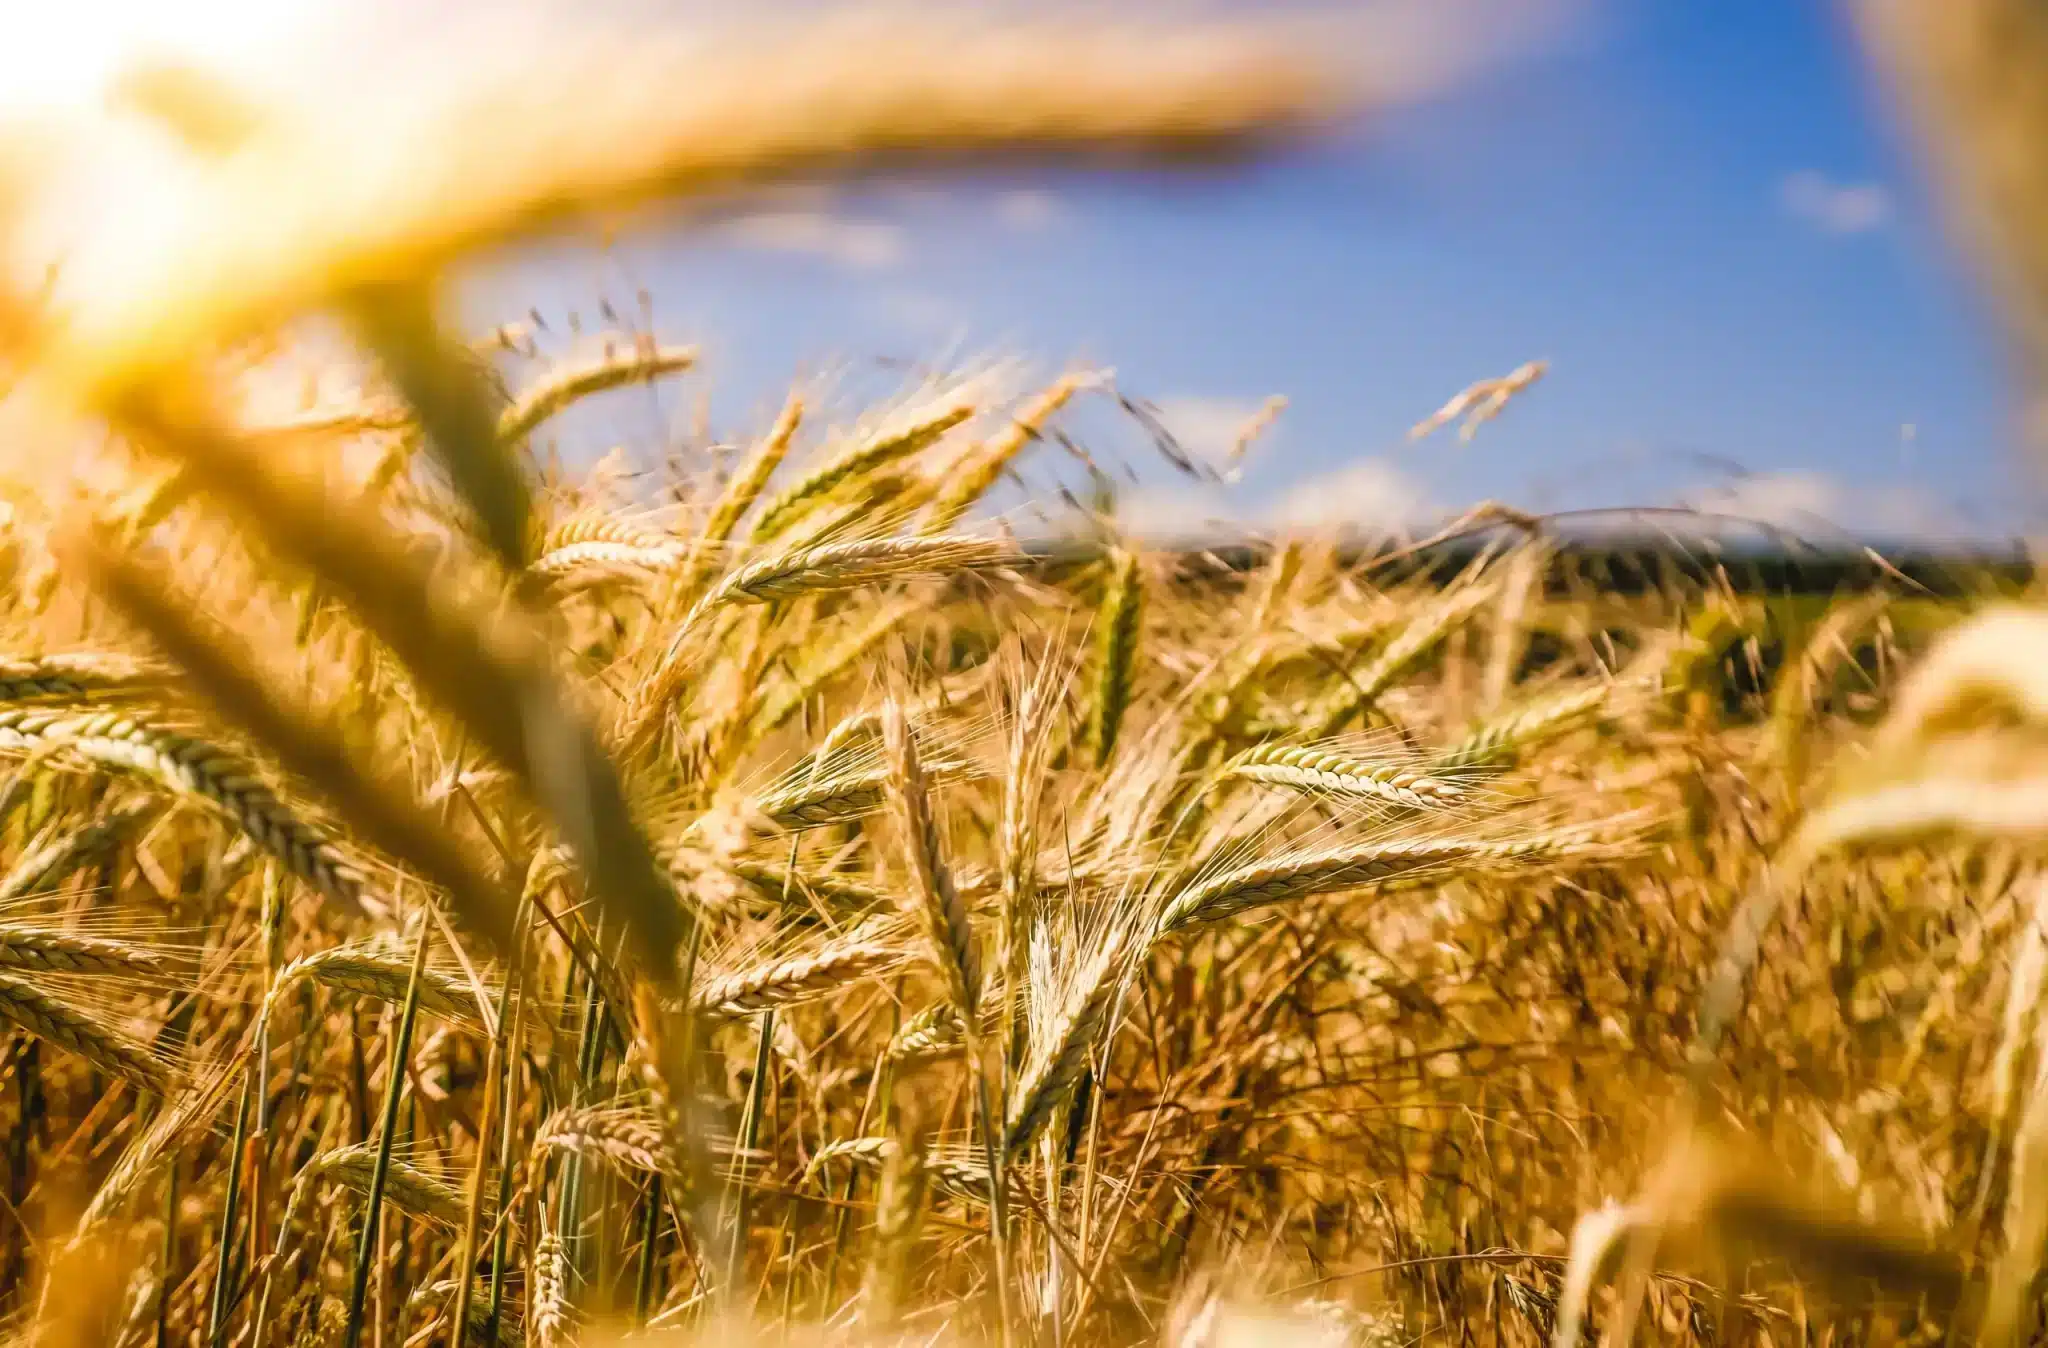 A vibrant and sunlit field of golden wheat, with the heads of the wheat stalks in sharp focus in the foreground, swaying gently in the breeze. The background softly blurs into a clear blue sky, evoking a sense of warmth and the ripeness of summer.